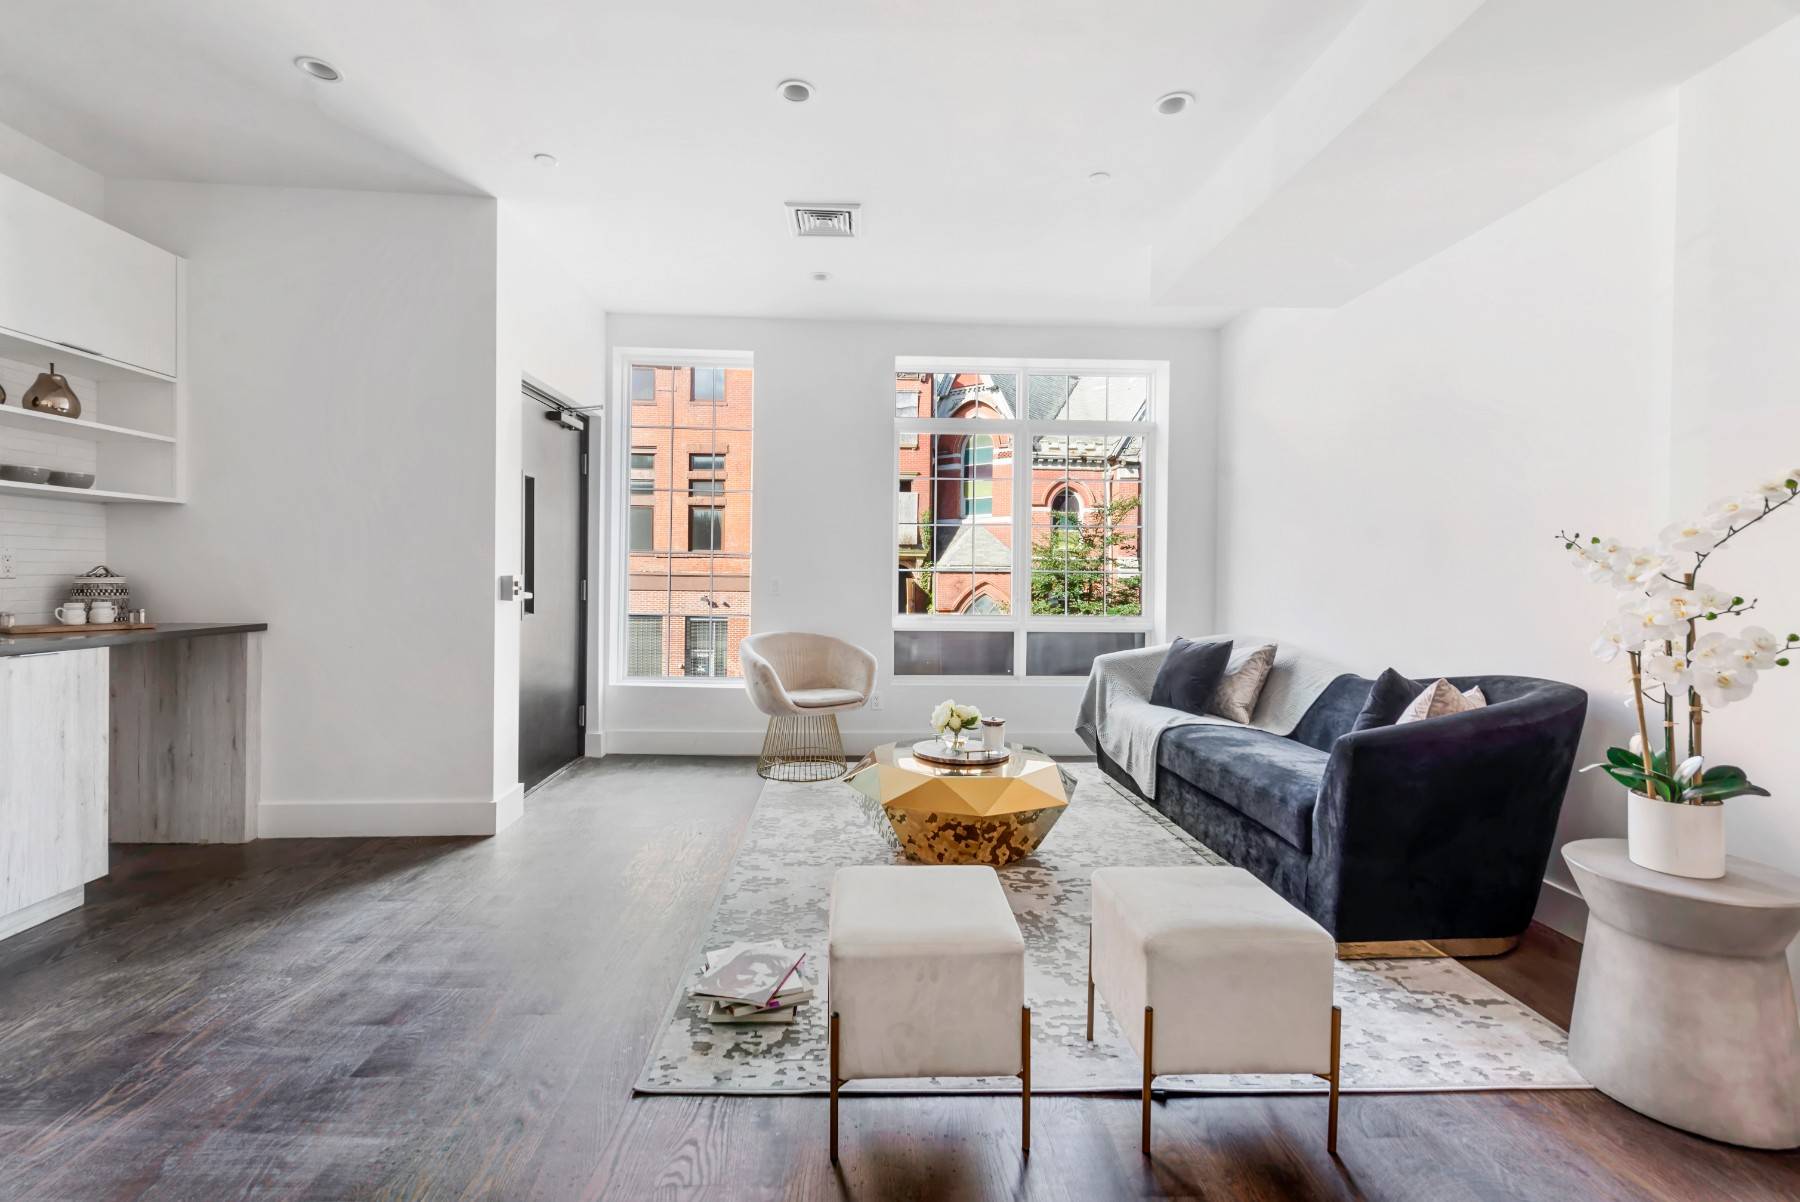 335 341 NOSTRAND OFFERS 15 YEAR TAX ABATEMENT Luxury living in trendy, up and coming Brooklyn !